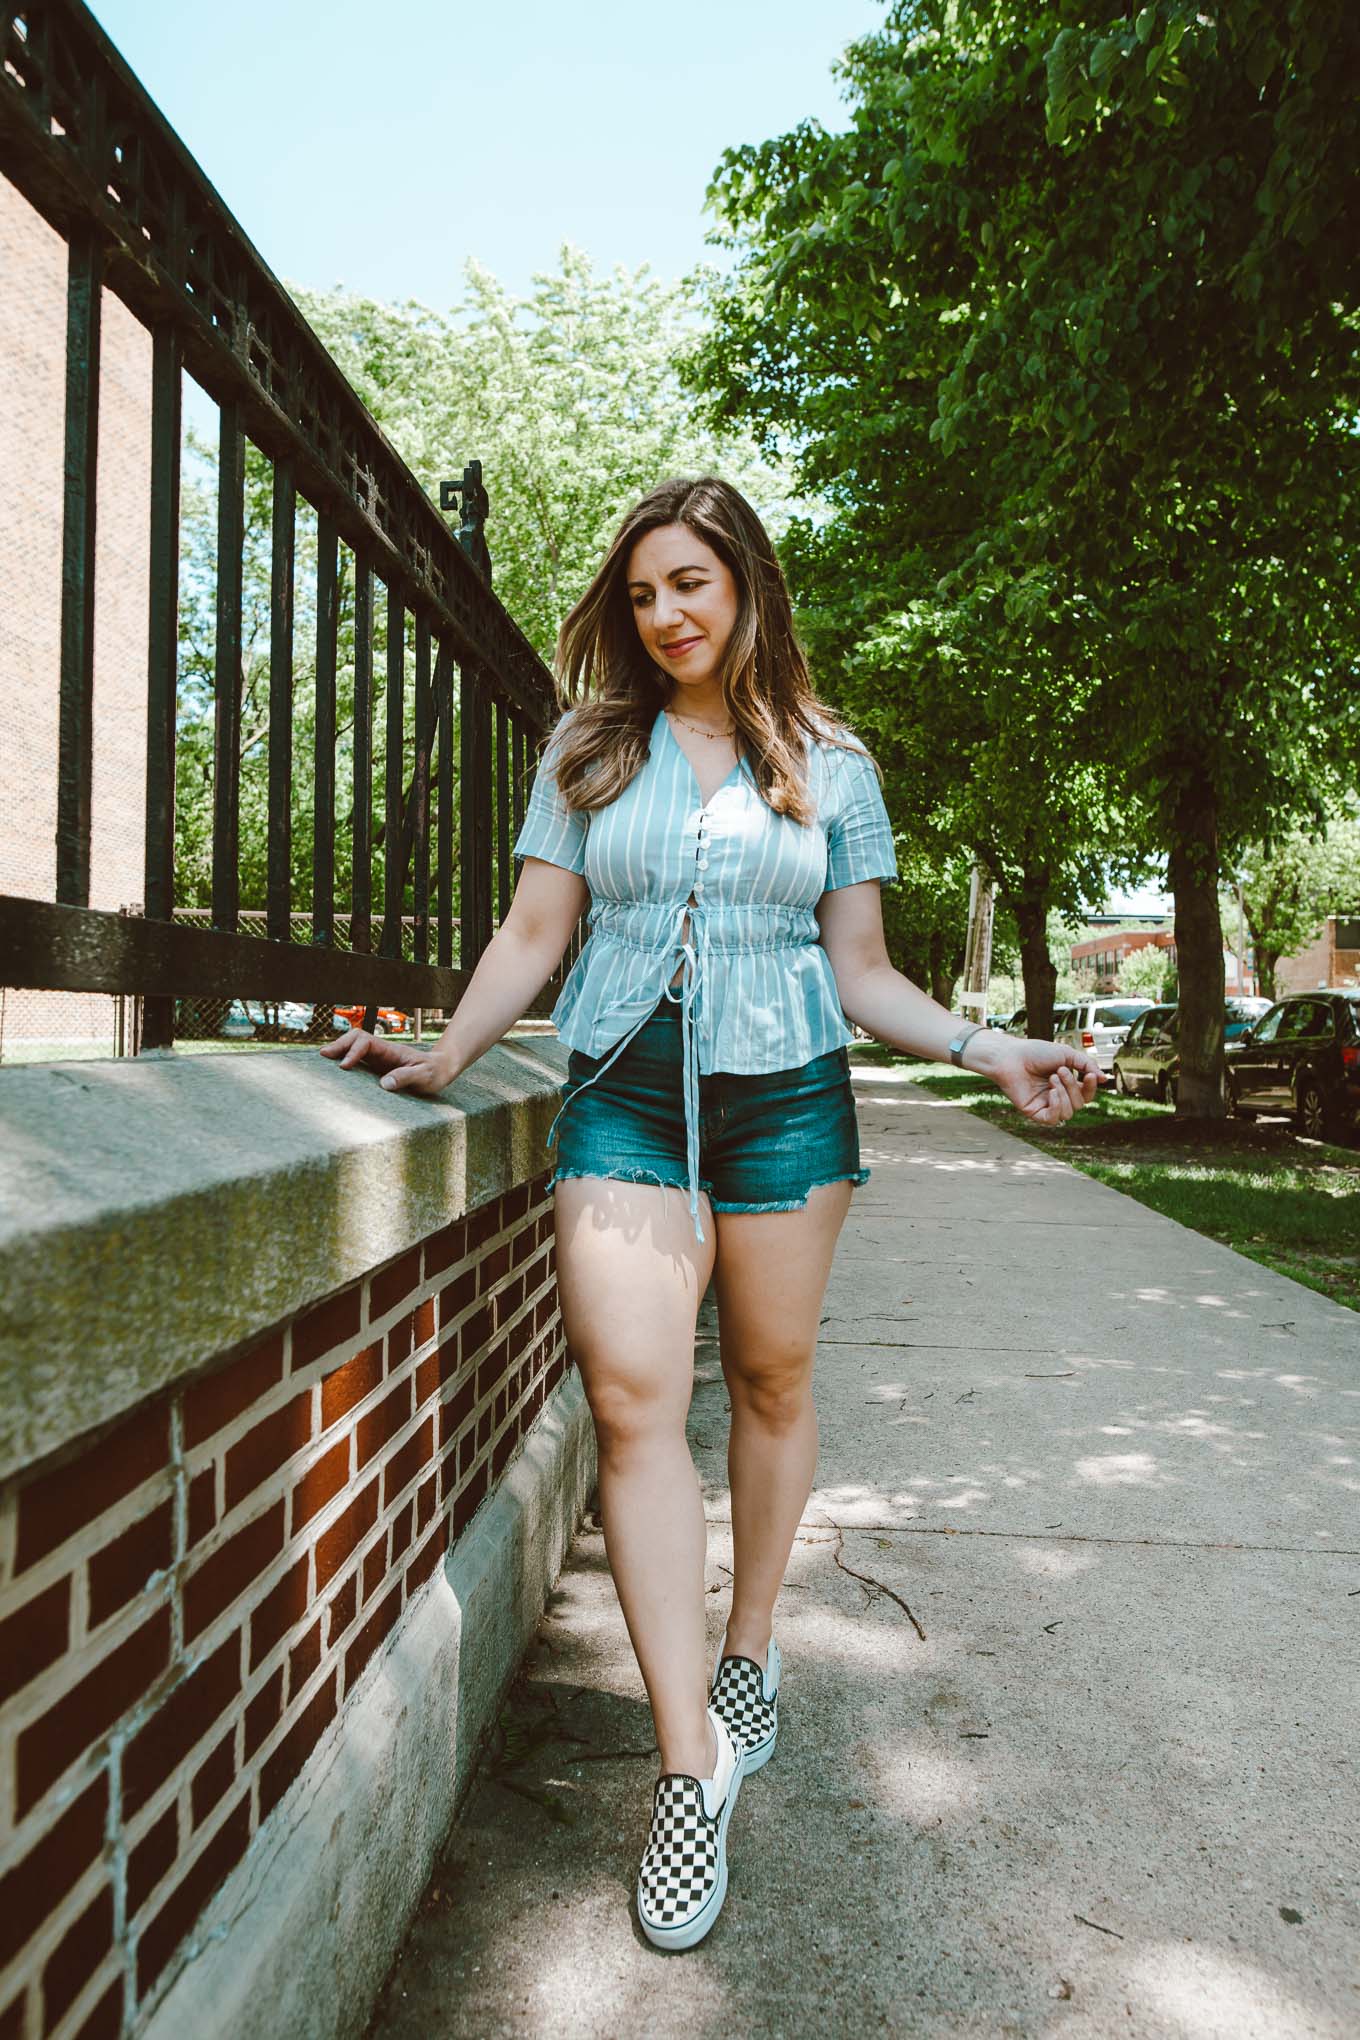  Curvy Shorts by popular Chicago fashion blog, Glass of Glam: image of Roxanne Birmbaum wearing a SHEIN Buttoned Tie Front Striped Peplum Blouse, American Eagle AE Ne(x)t Level Curvy Denim High-Waisted Short Short, and Nordstrom Classic Slip-On Sneaker VANS.